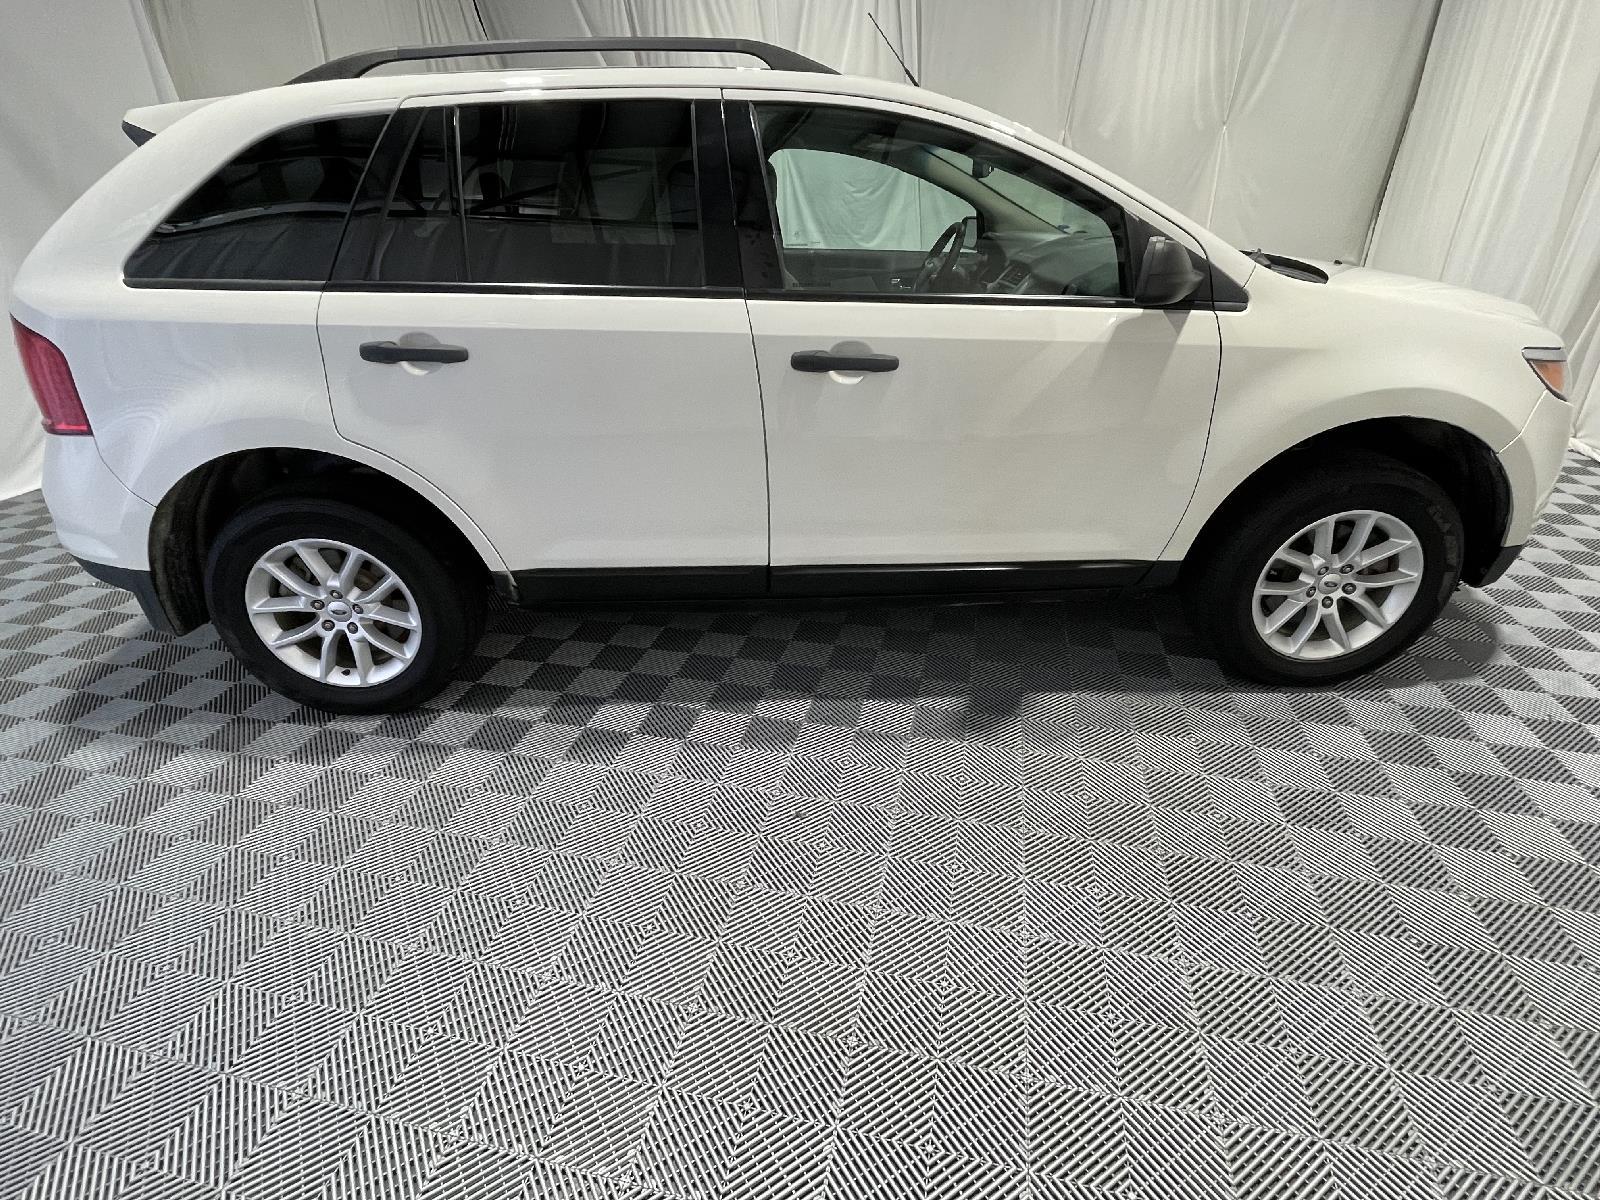 Used 2013 Ford Edge SE SUV for sale in St Joseph MO